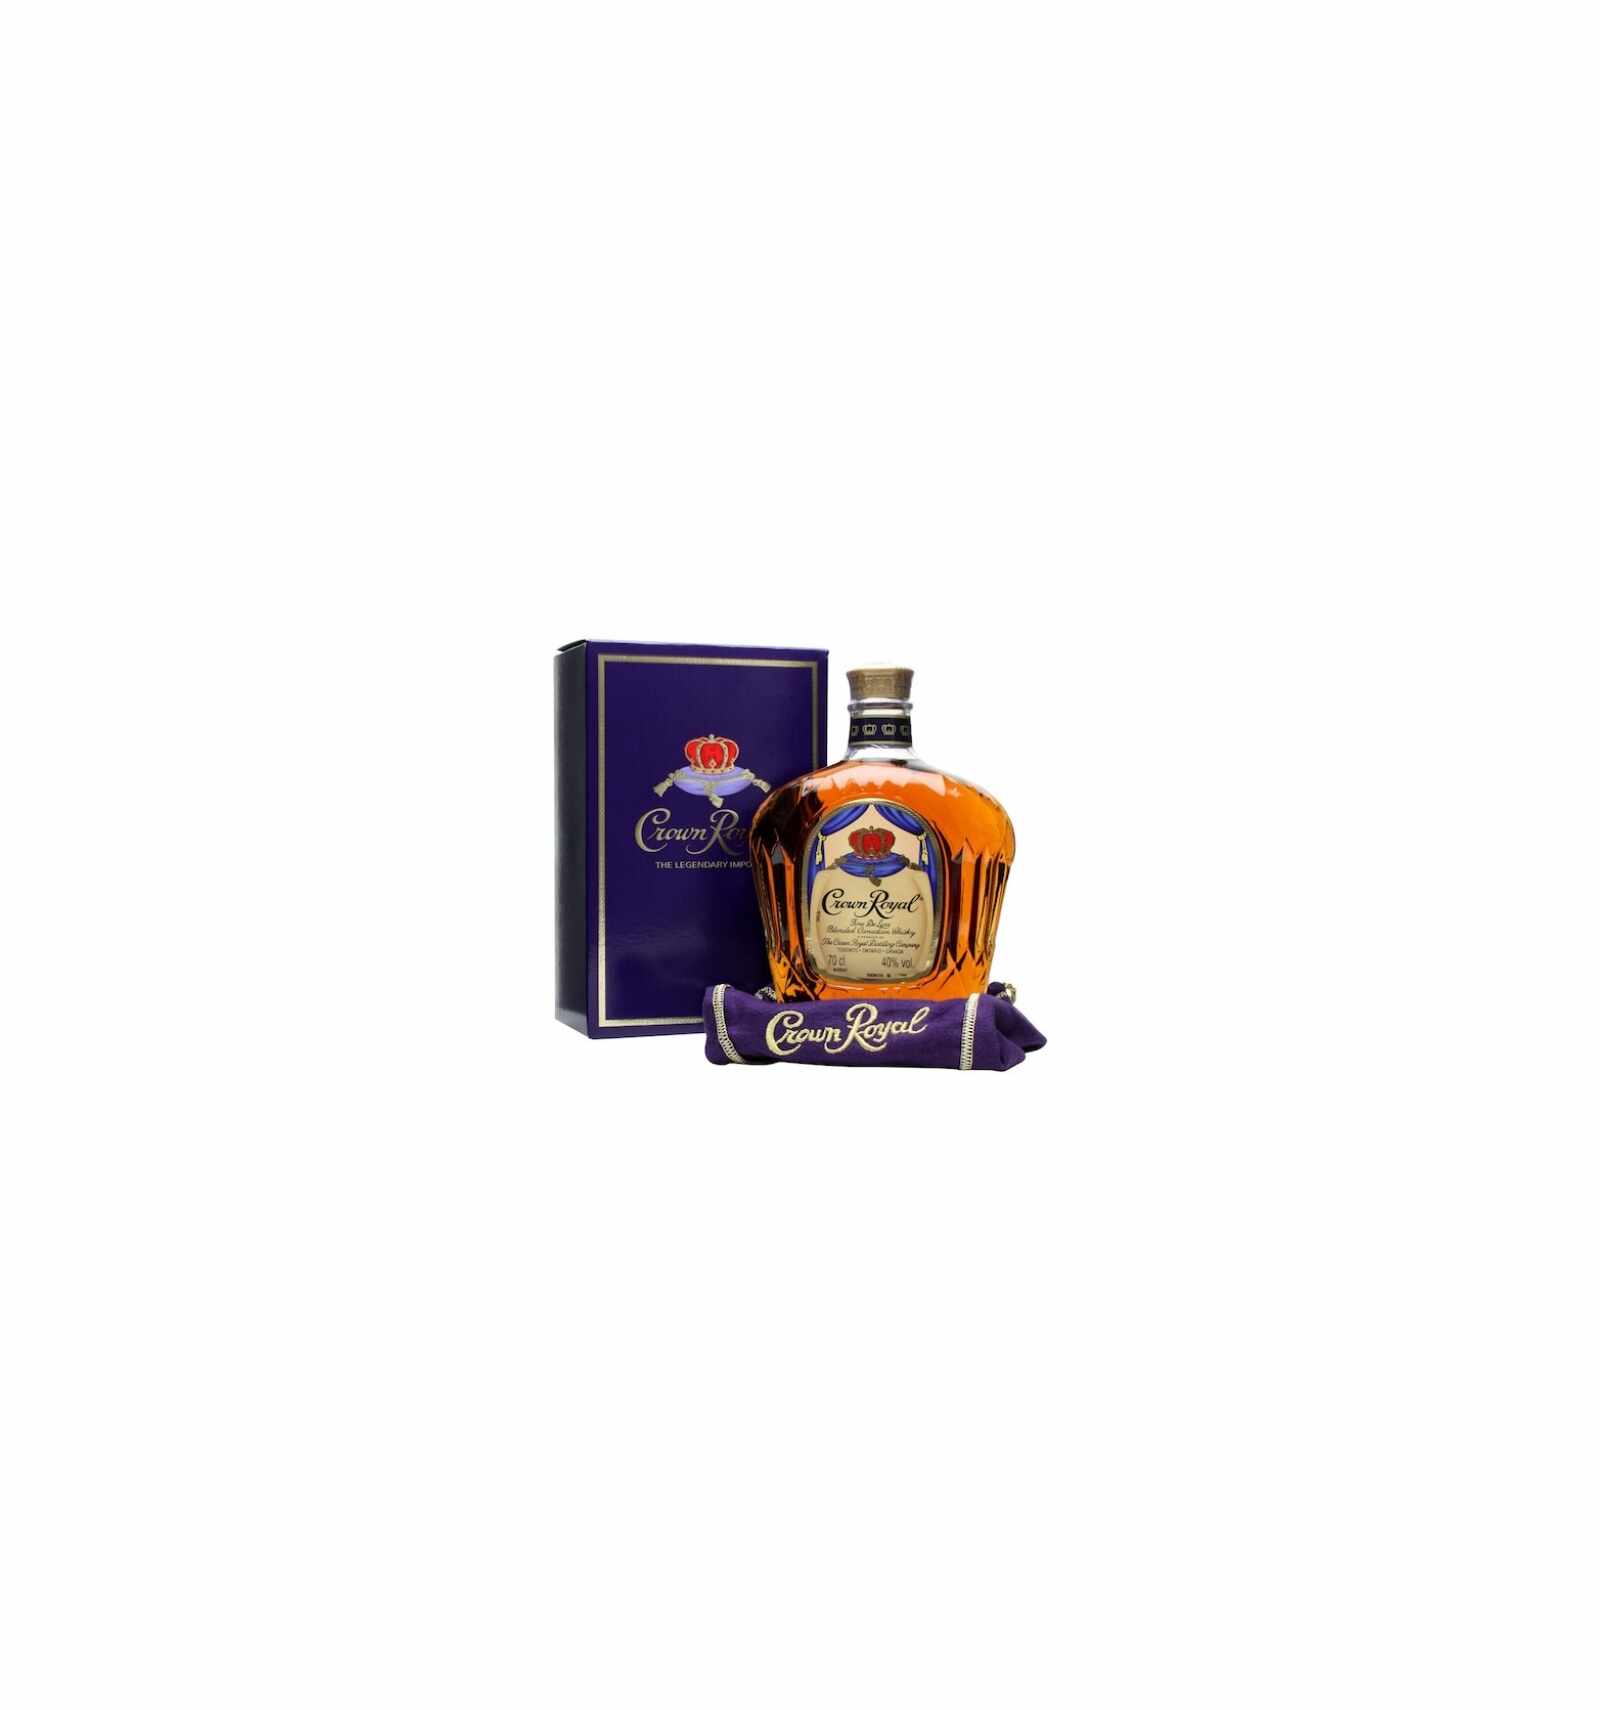 Whisky Crown Royal, 40% alc., 1L, Canada